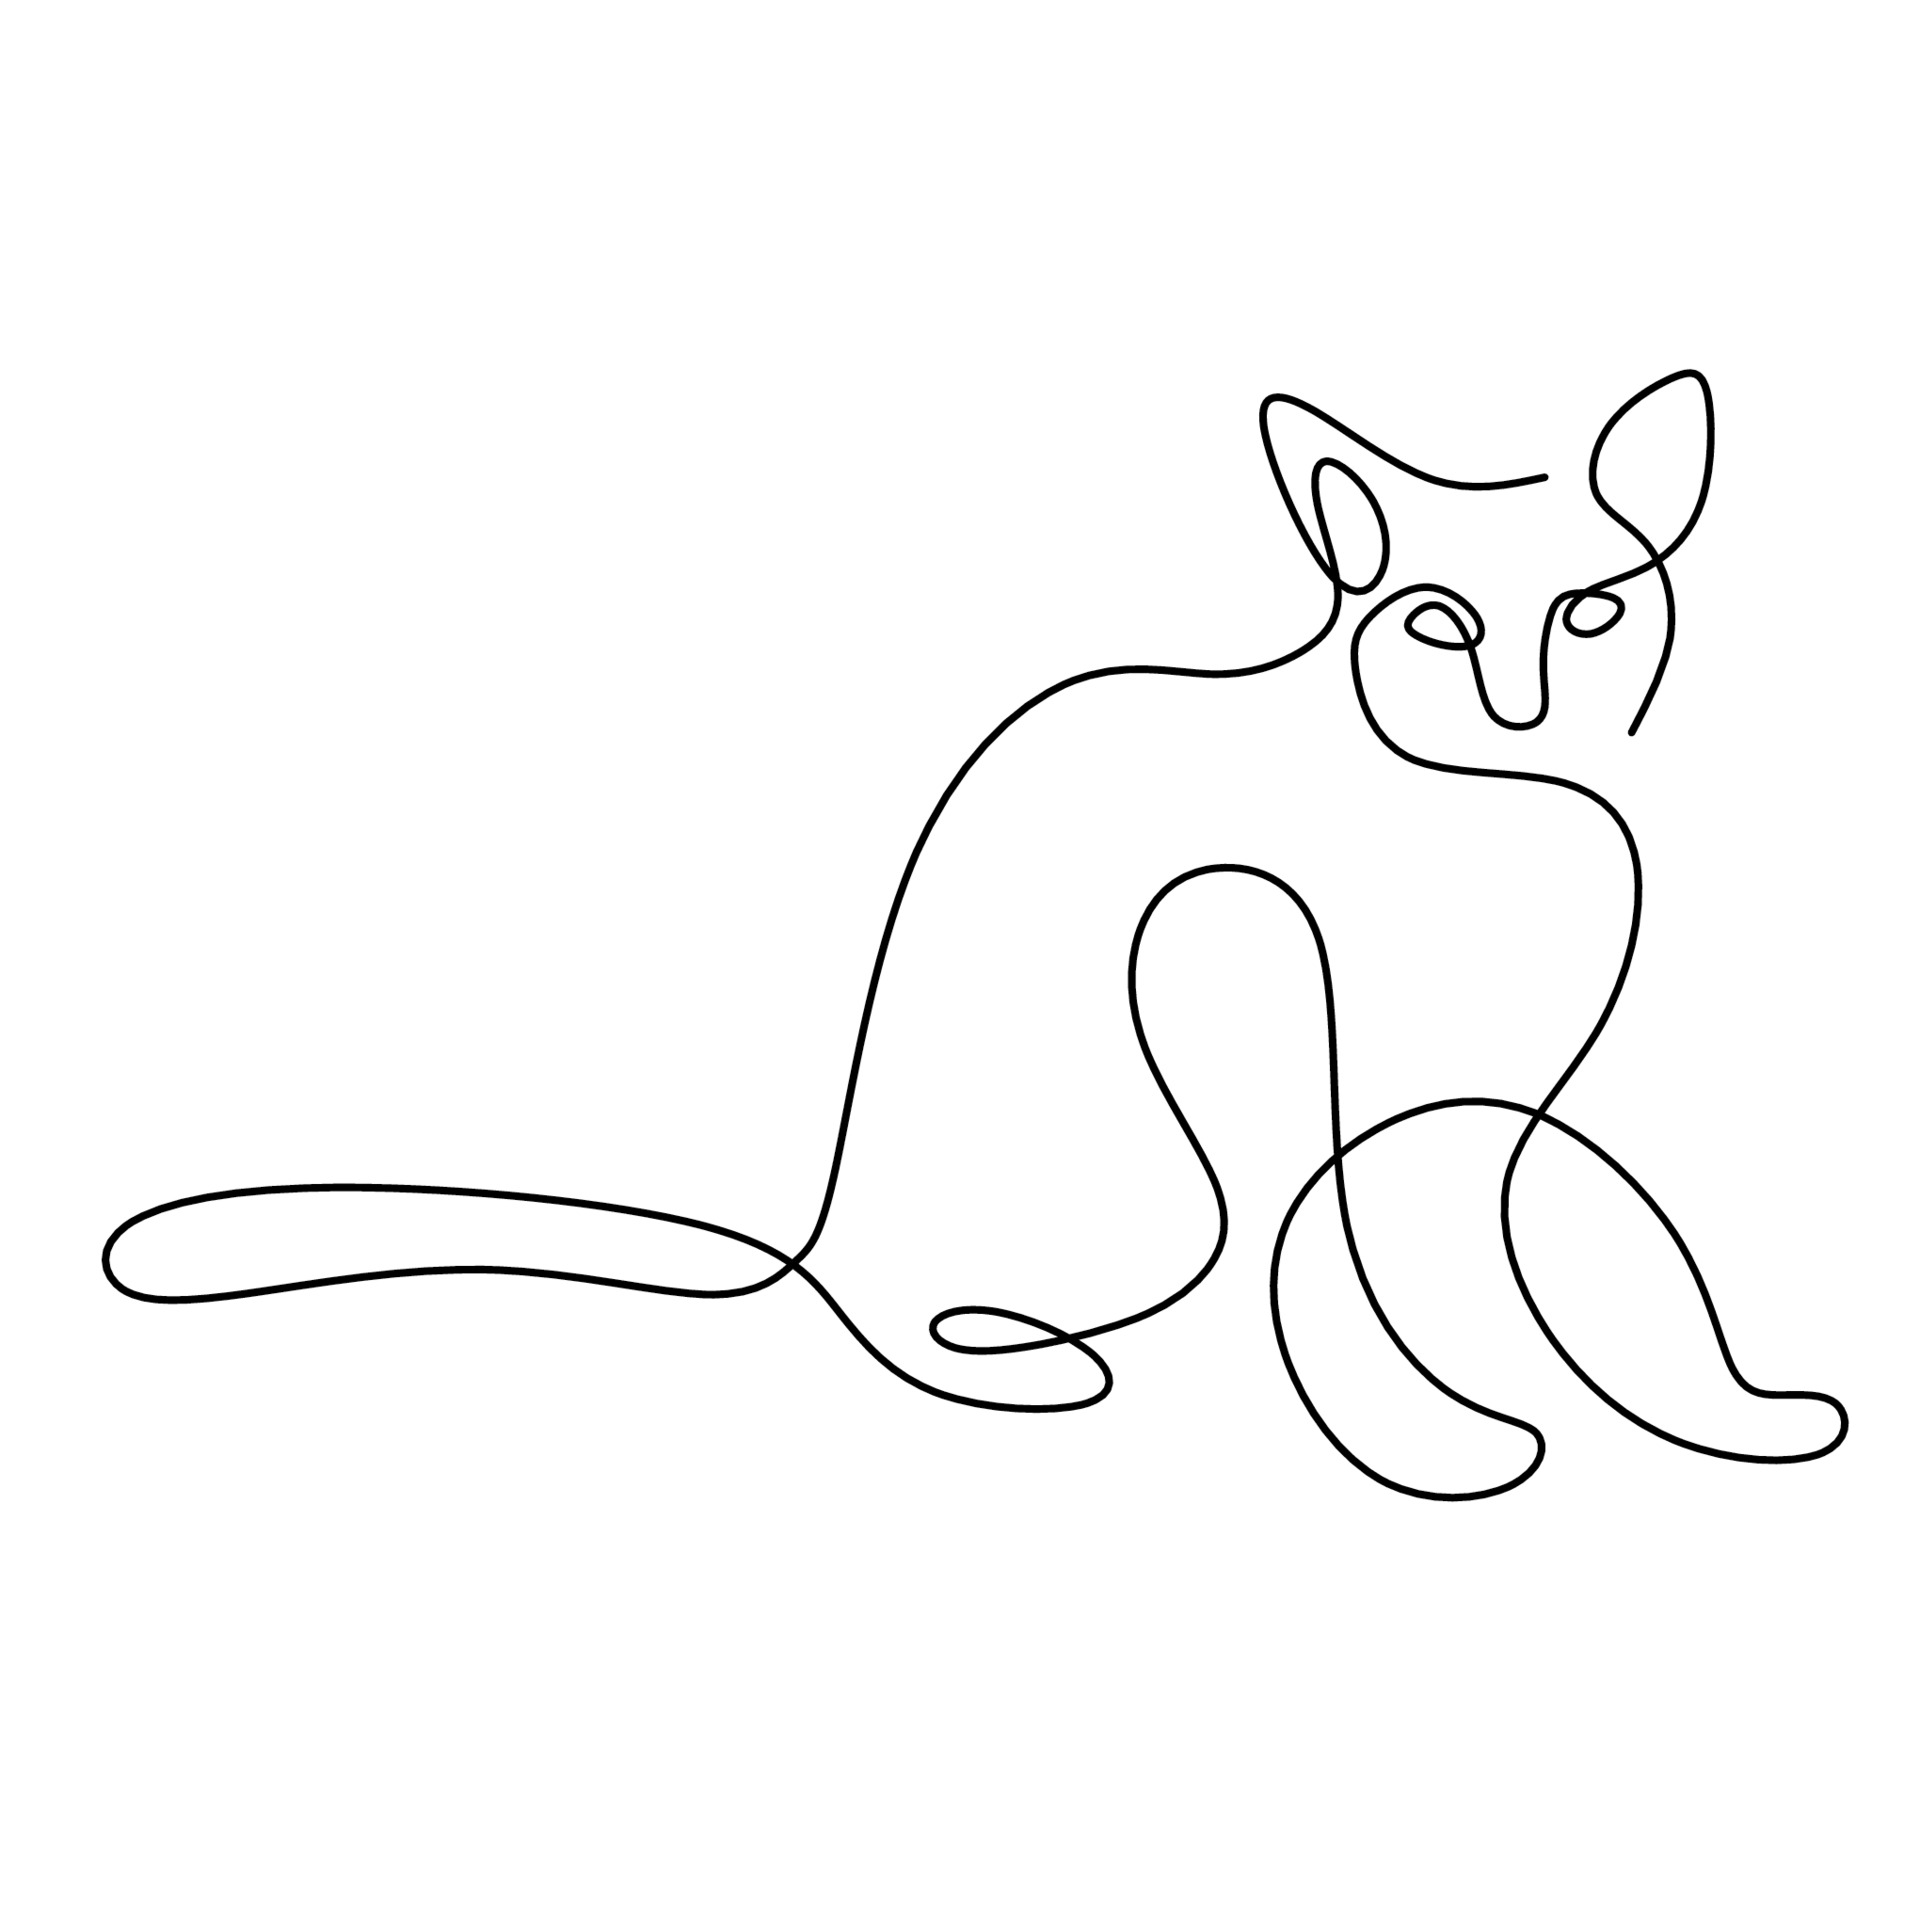 Cute cats collection, vector icons, hand drawn illustrations